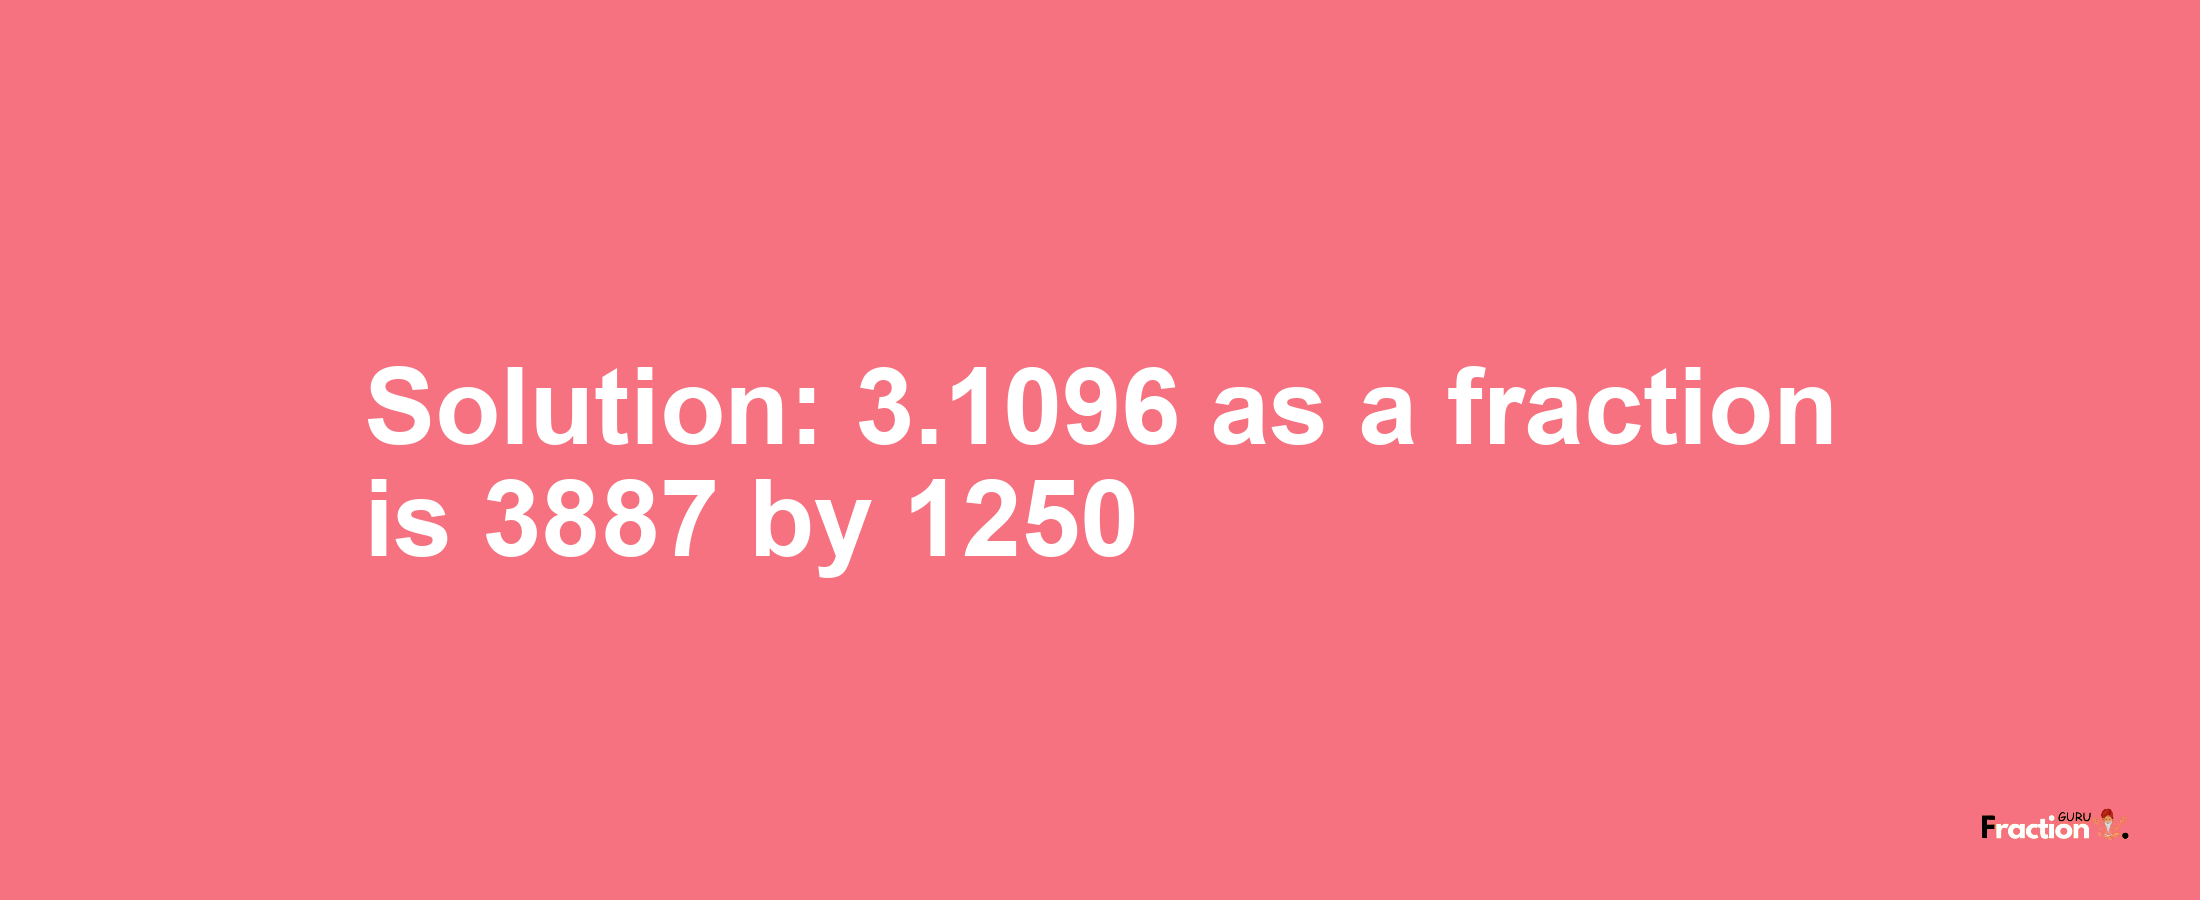 Solution:3.1096 as a fraction is 3887/1250